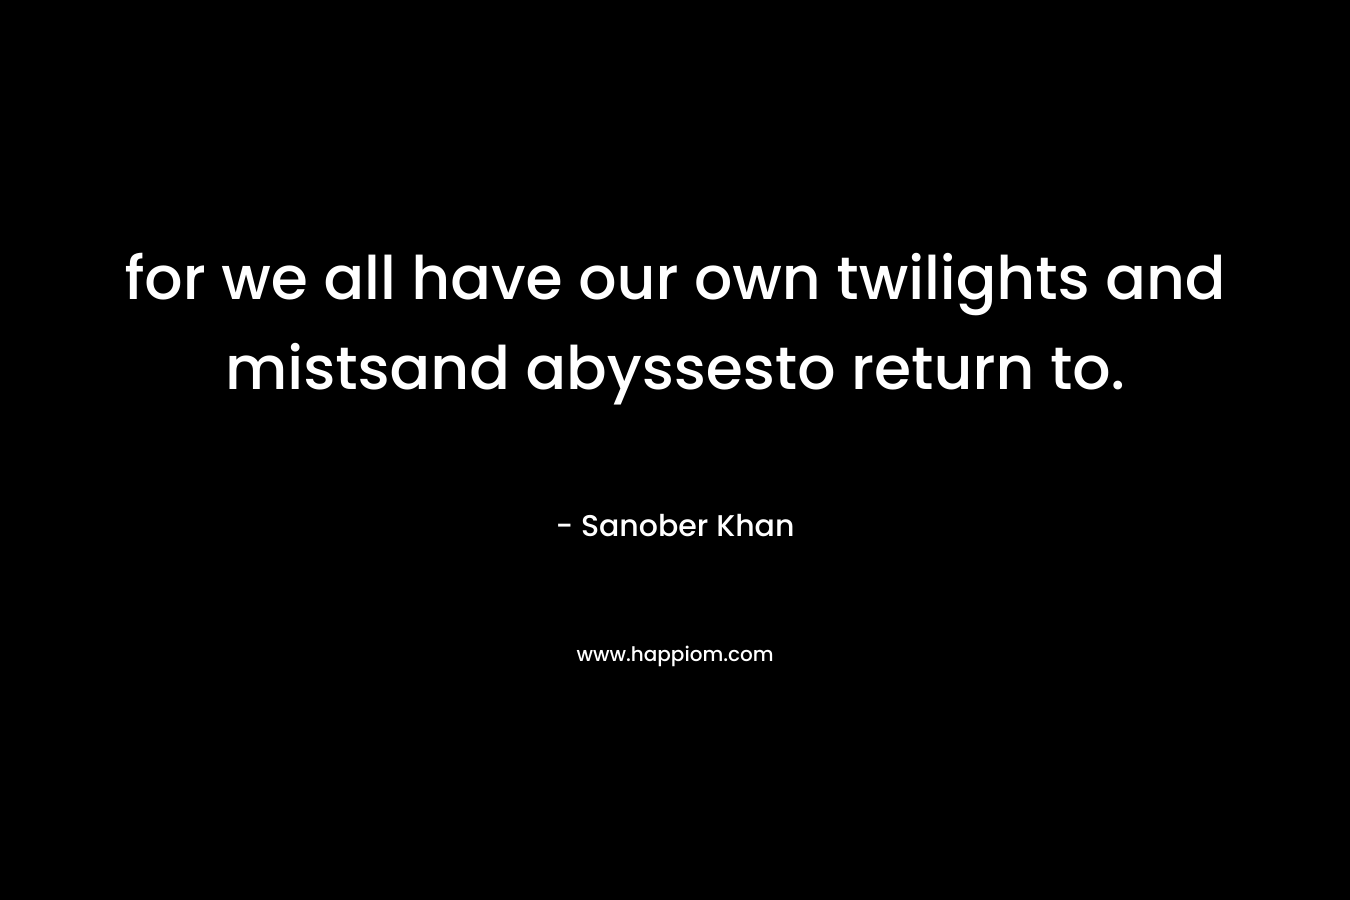 for we all have our own twilights and mistsand abyssesto return to.